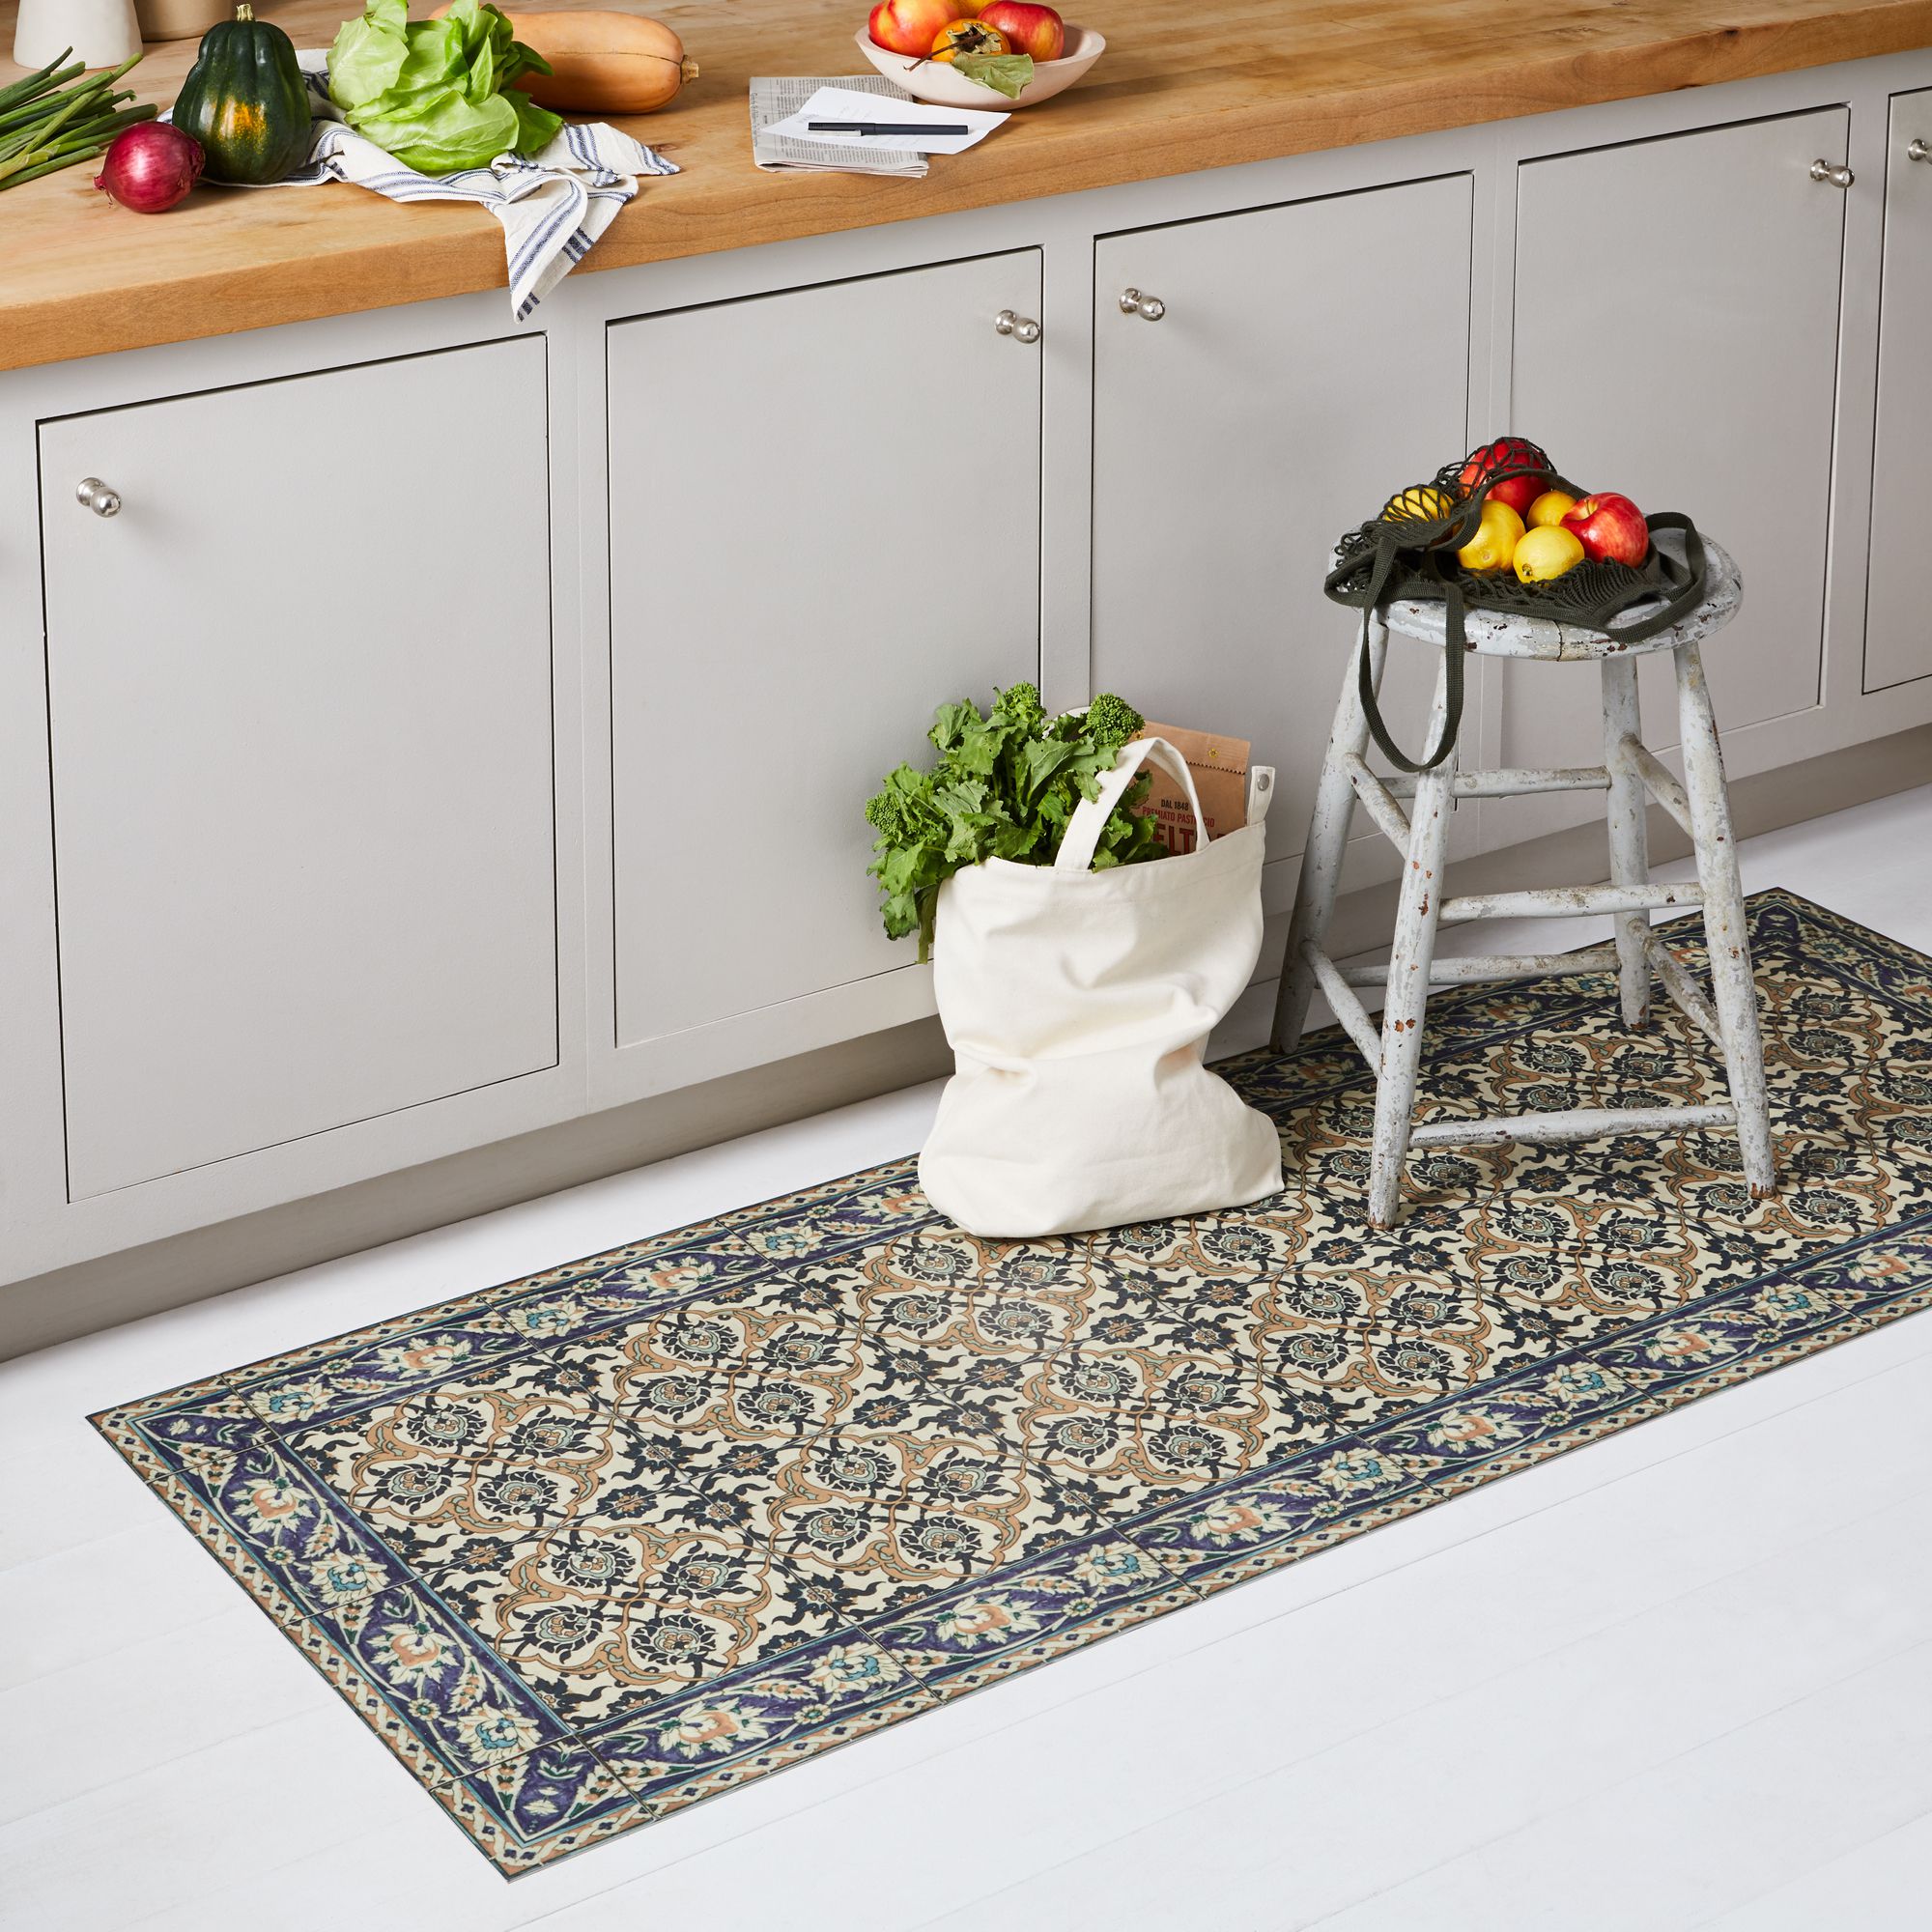 Find Kitchen Floor Mats for Your Home in Bulk 